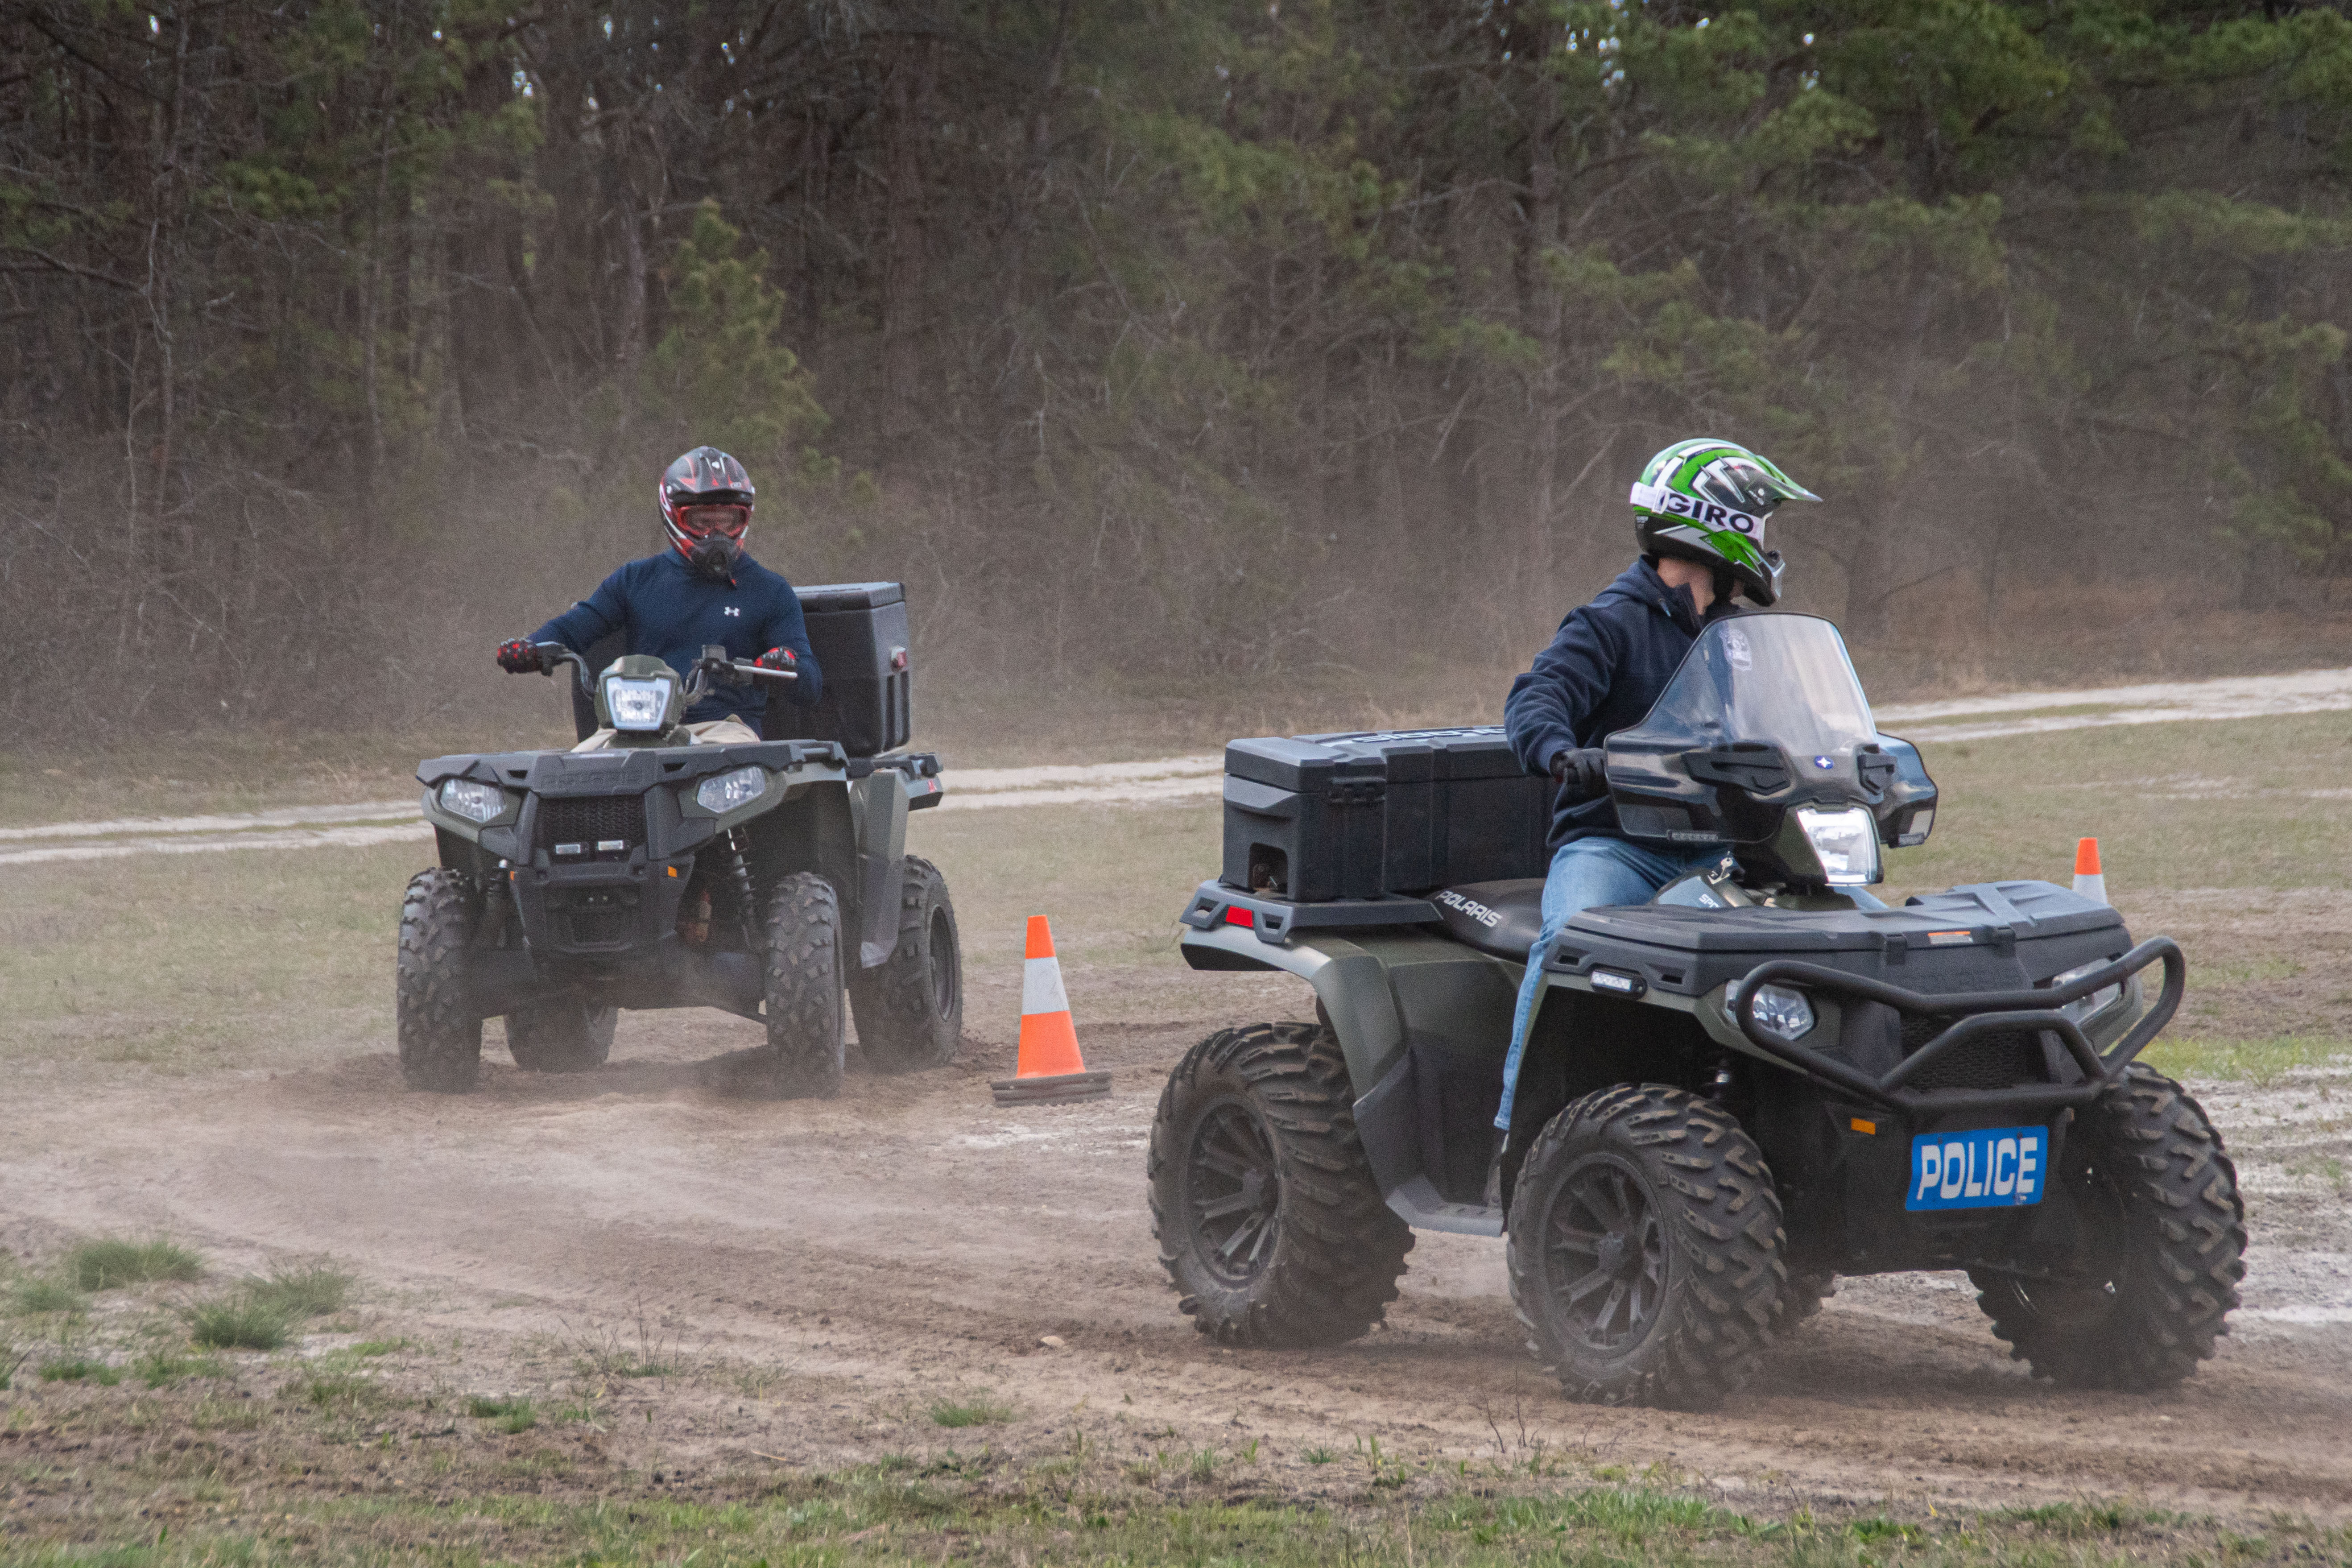 Southampton Town Police are among the agencies  participating in ATV training offered by the Suffolk County Sheriff's Office in Westhampton.  COURTESY SUFFOLK COUNTY SHERIFF